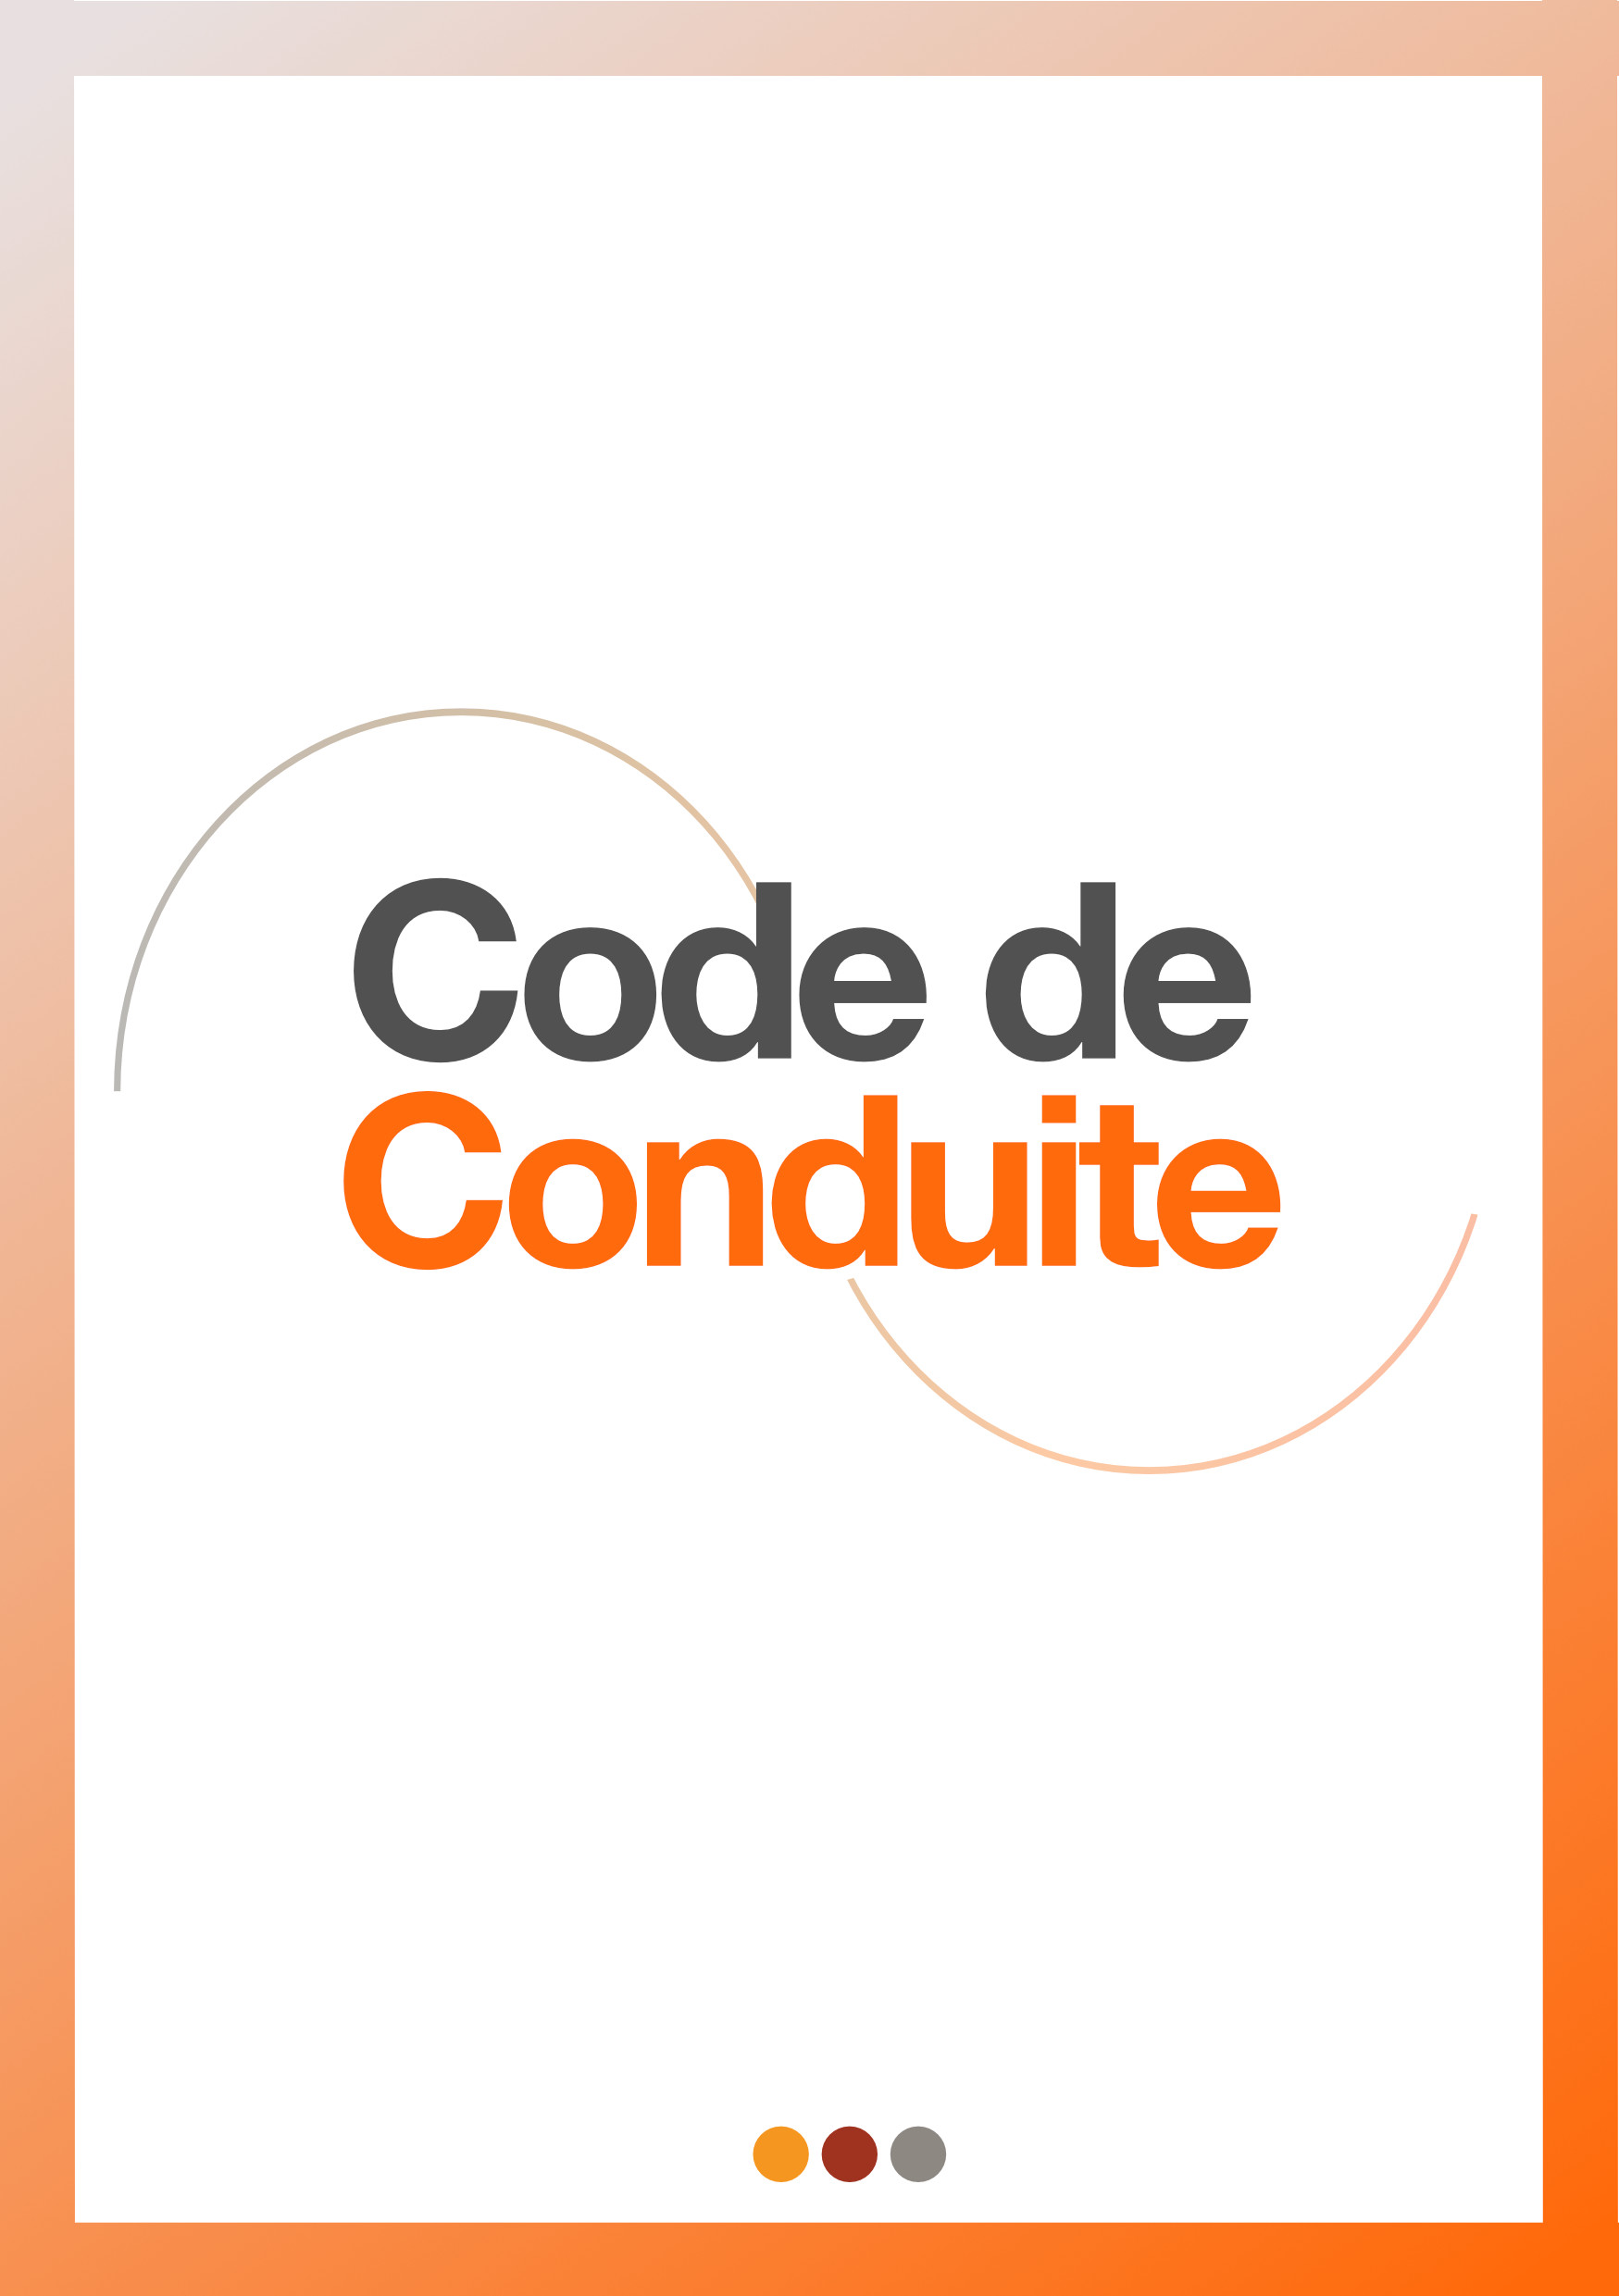 Online conference code of conduct